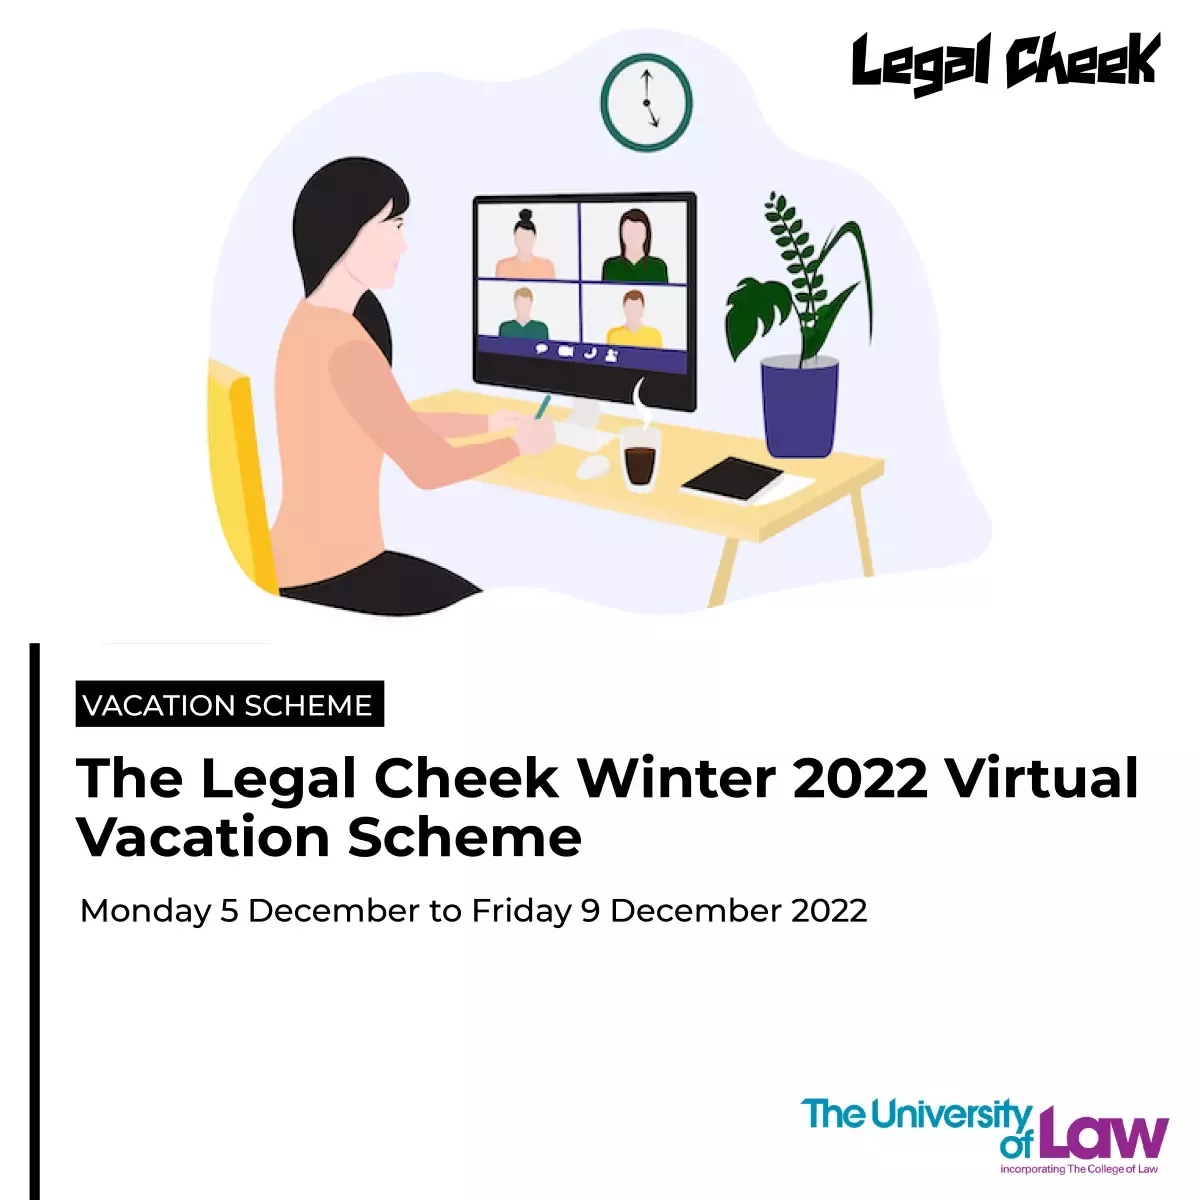 The Legal Cheek Winter Virtual Vacation Scheme, run in partnership with The University of Law, takes place from Monday 5 December until Friday 9 December 2022.